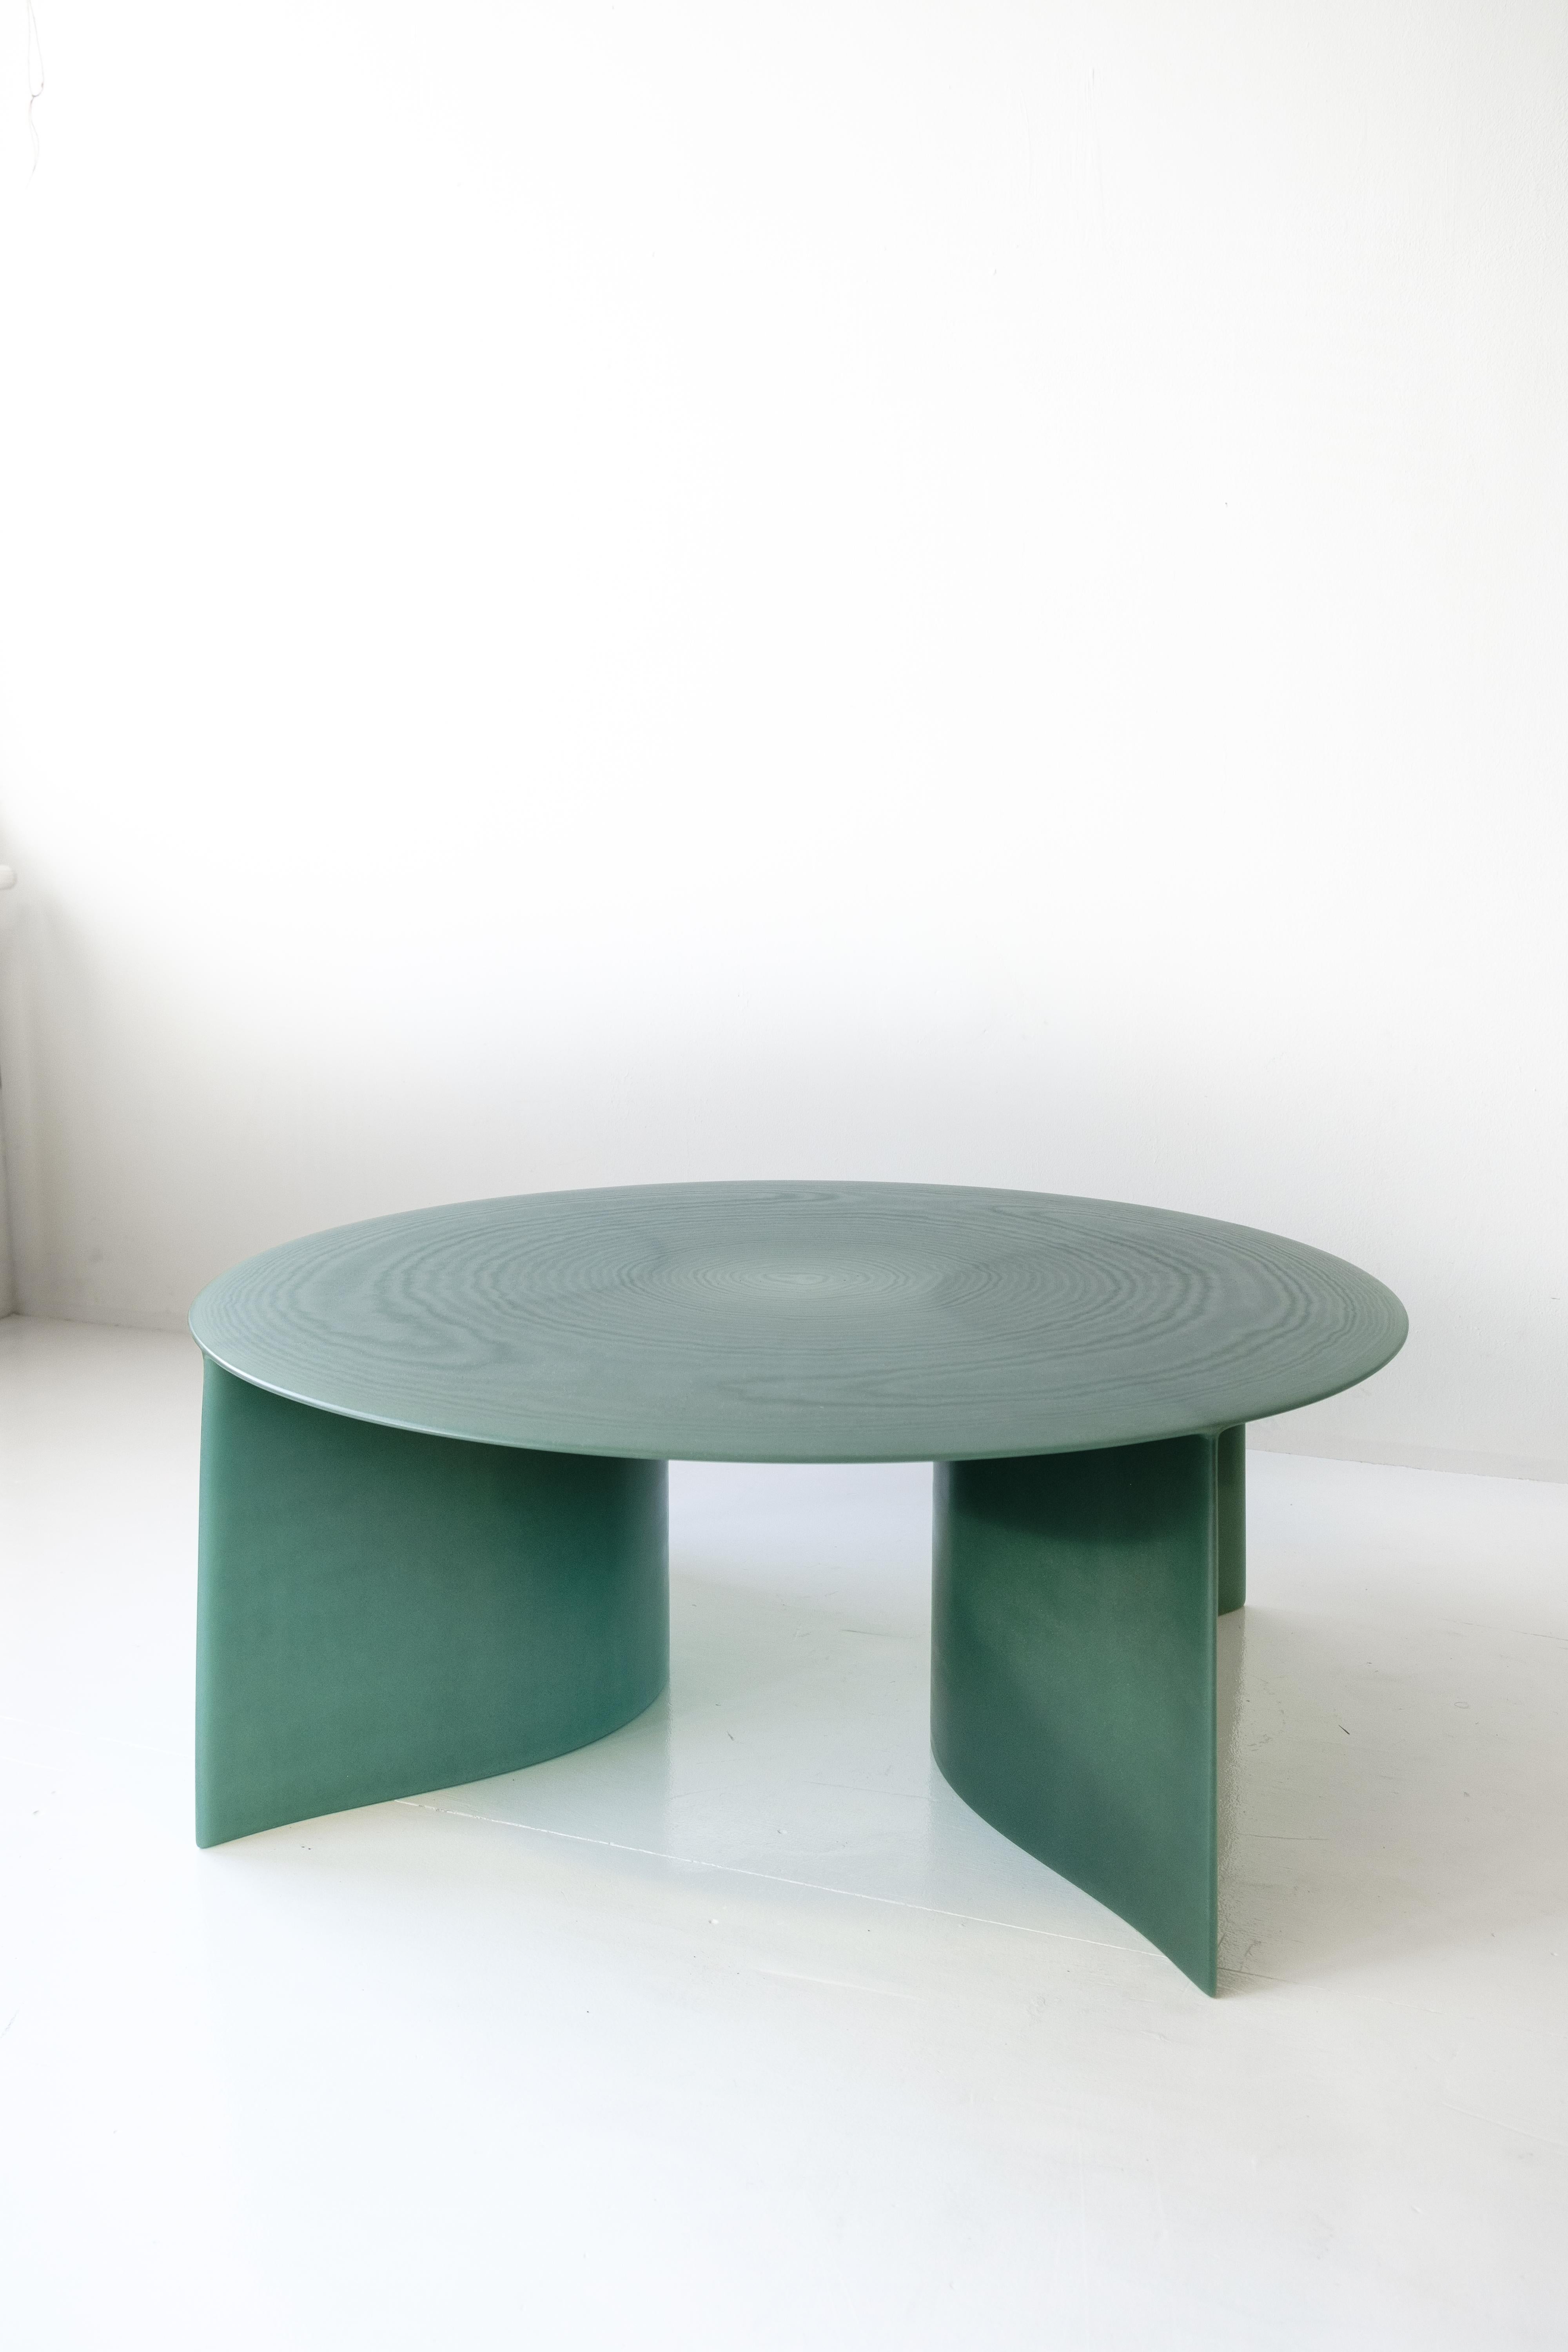 Contemporary Green Fiberglass, New Wave Coffee Table Round 120cm, by Lukas Cober 8